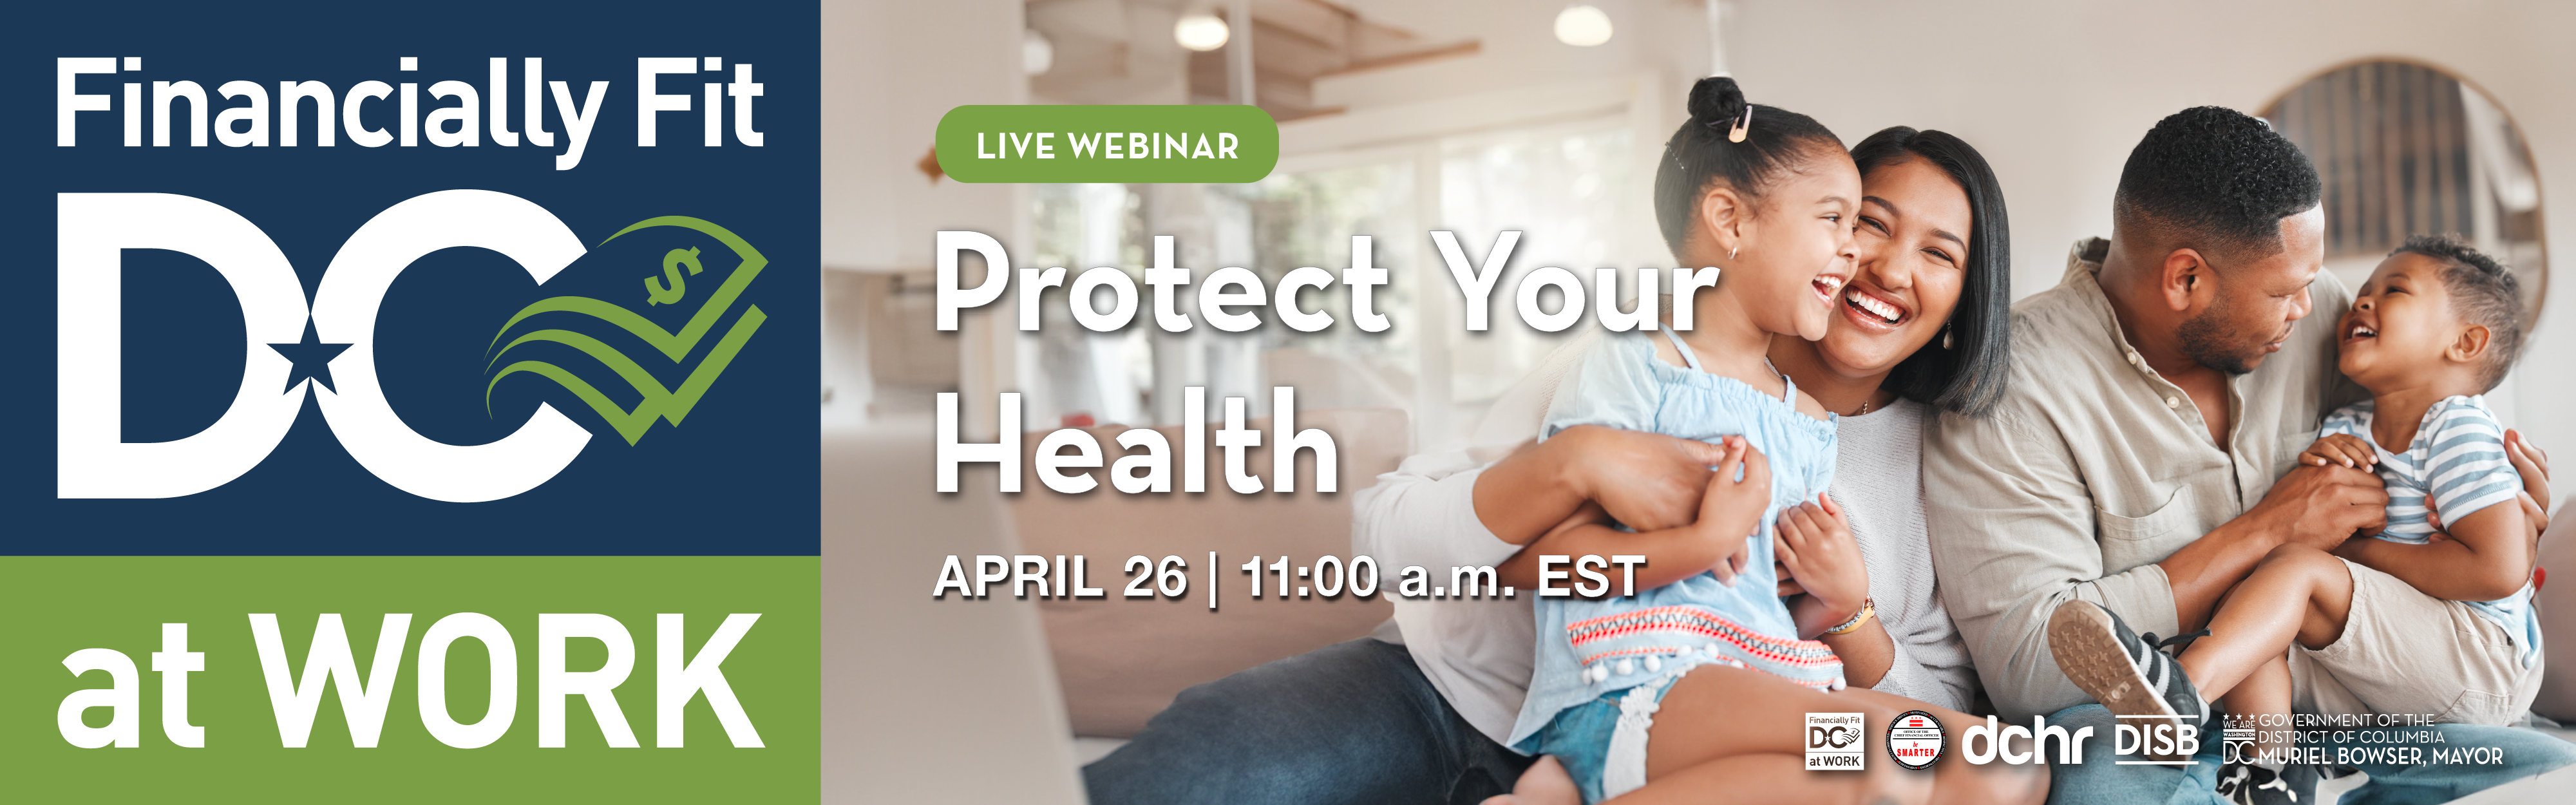 Financially Fit DC at Work Presents: Protect Your Health